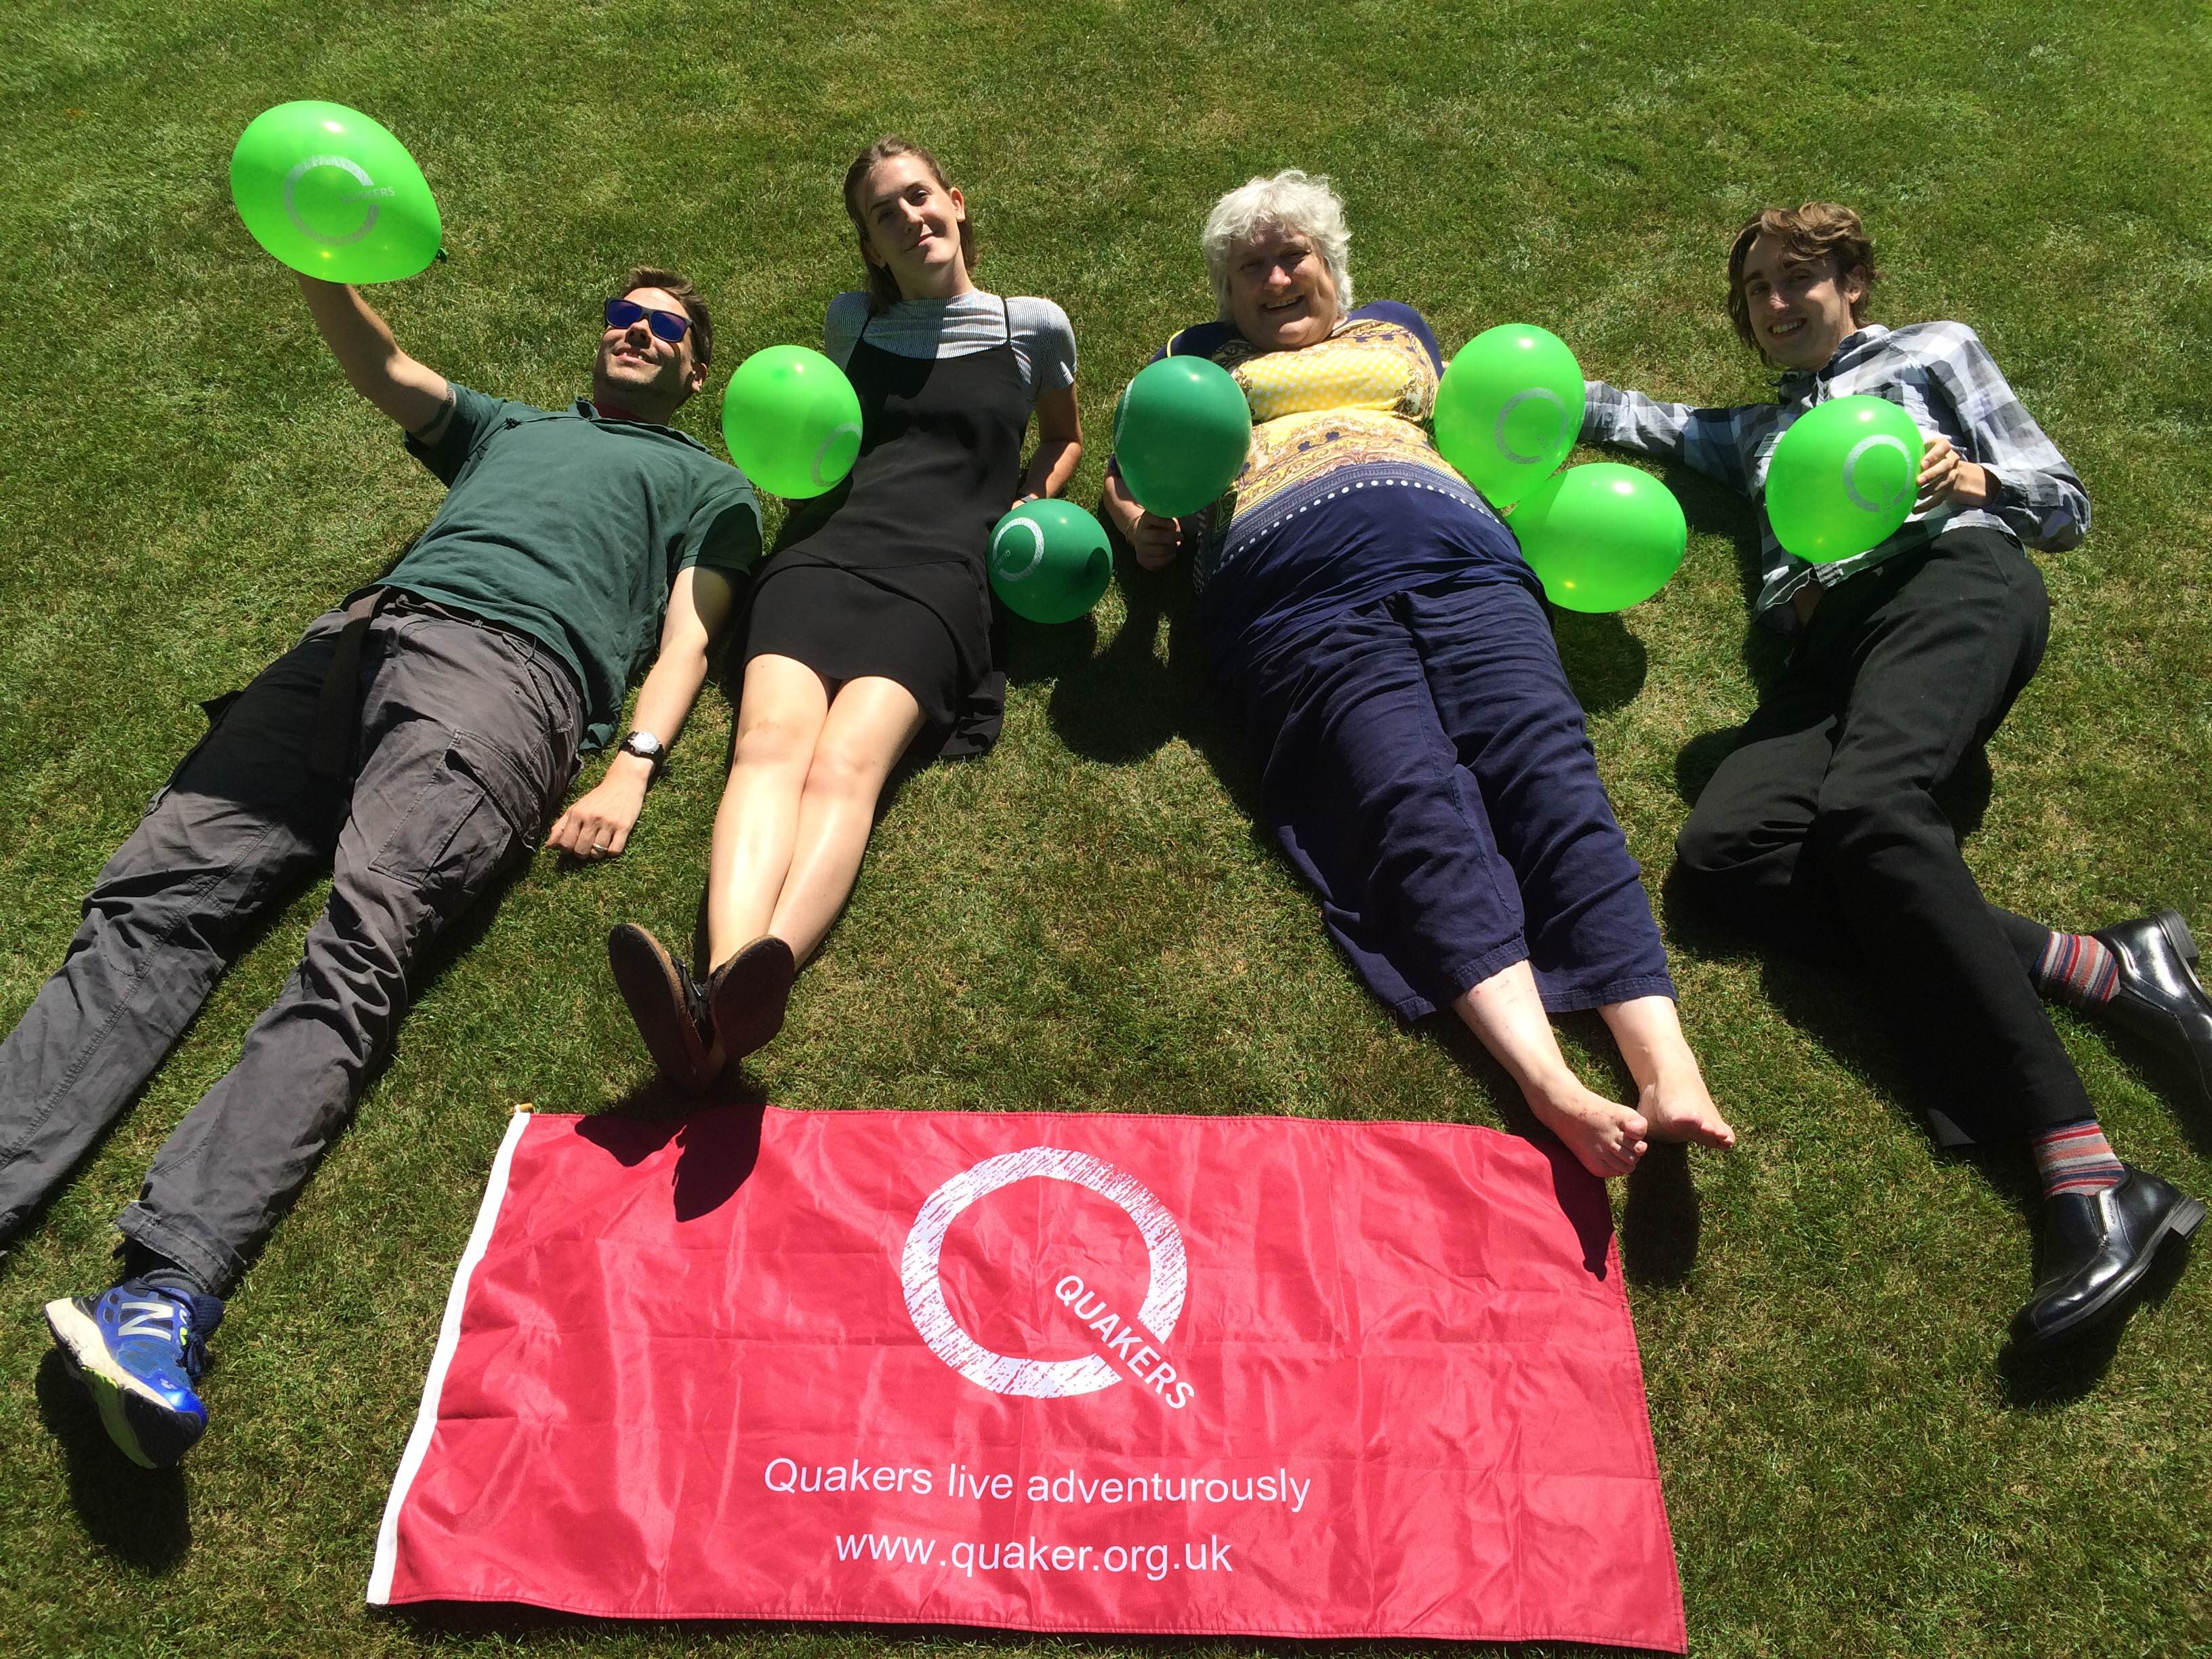 4 people laying on grass holding Quaker balloons